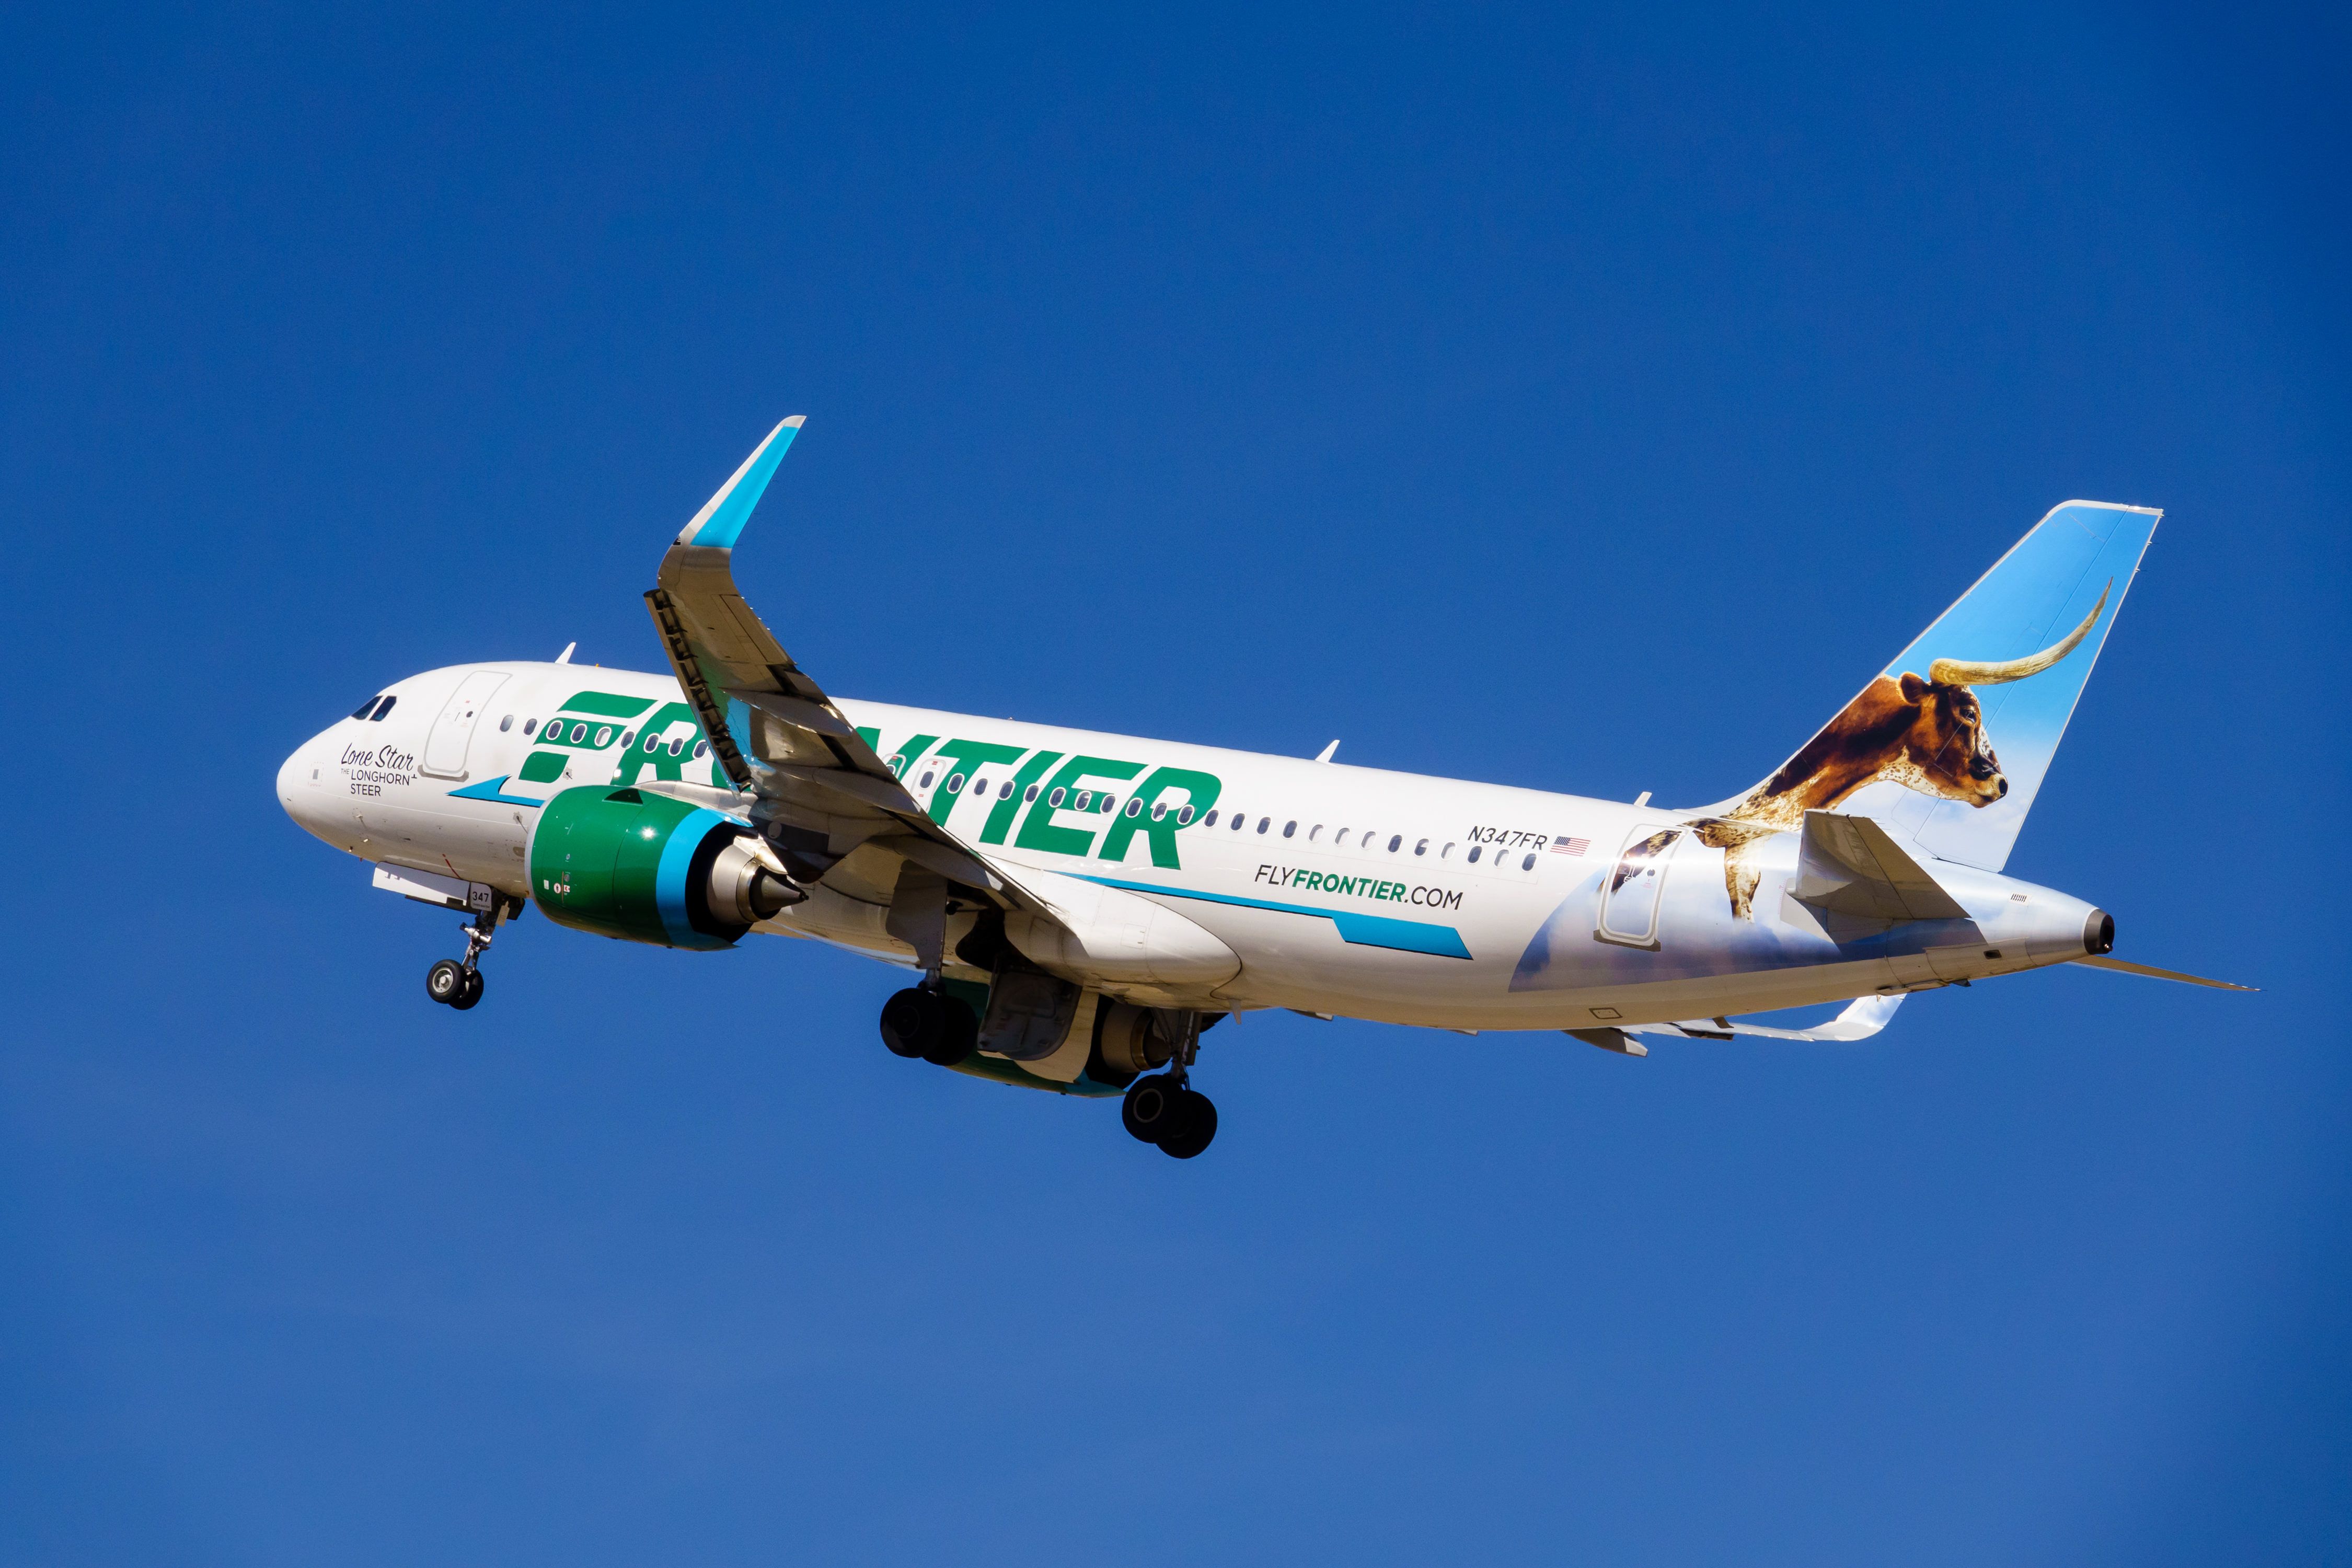 A Frontier Airlines jet